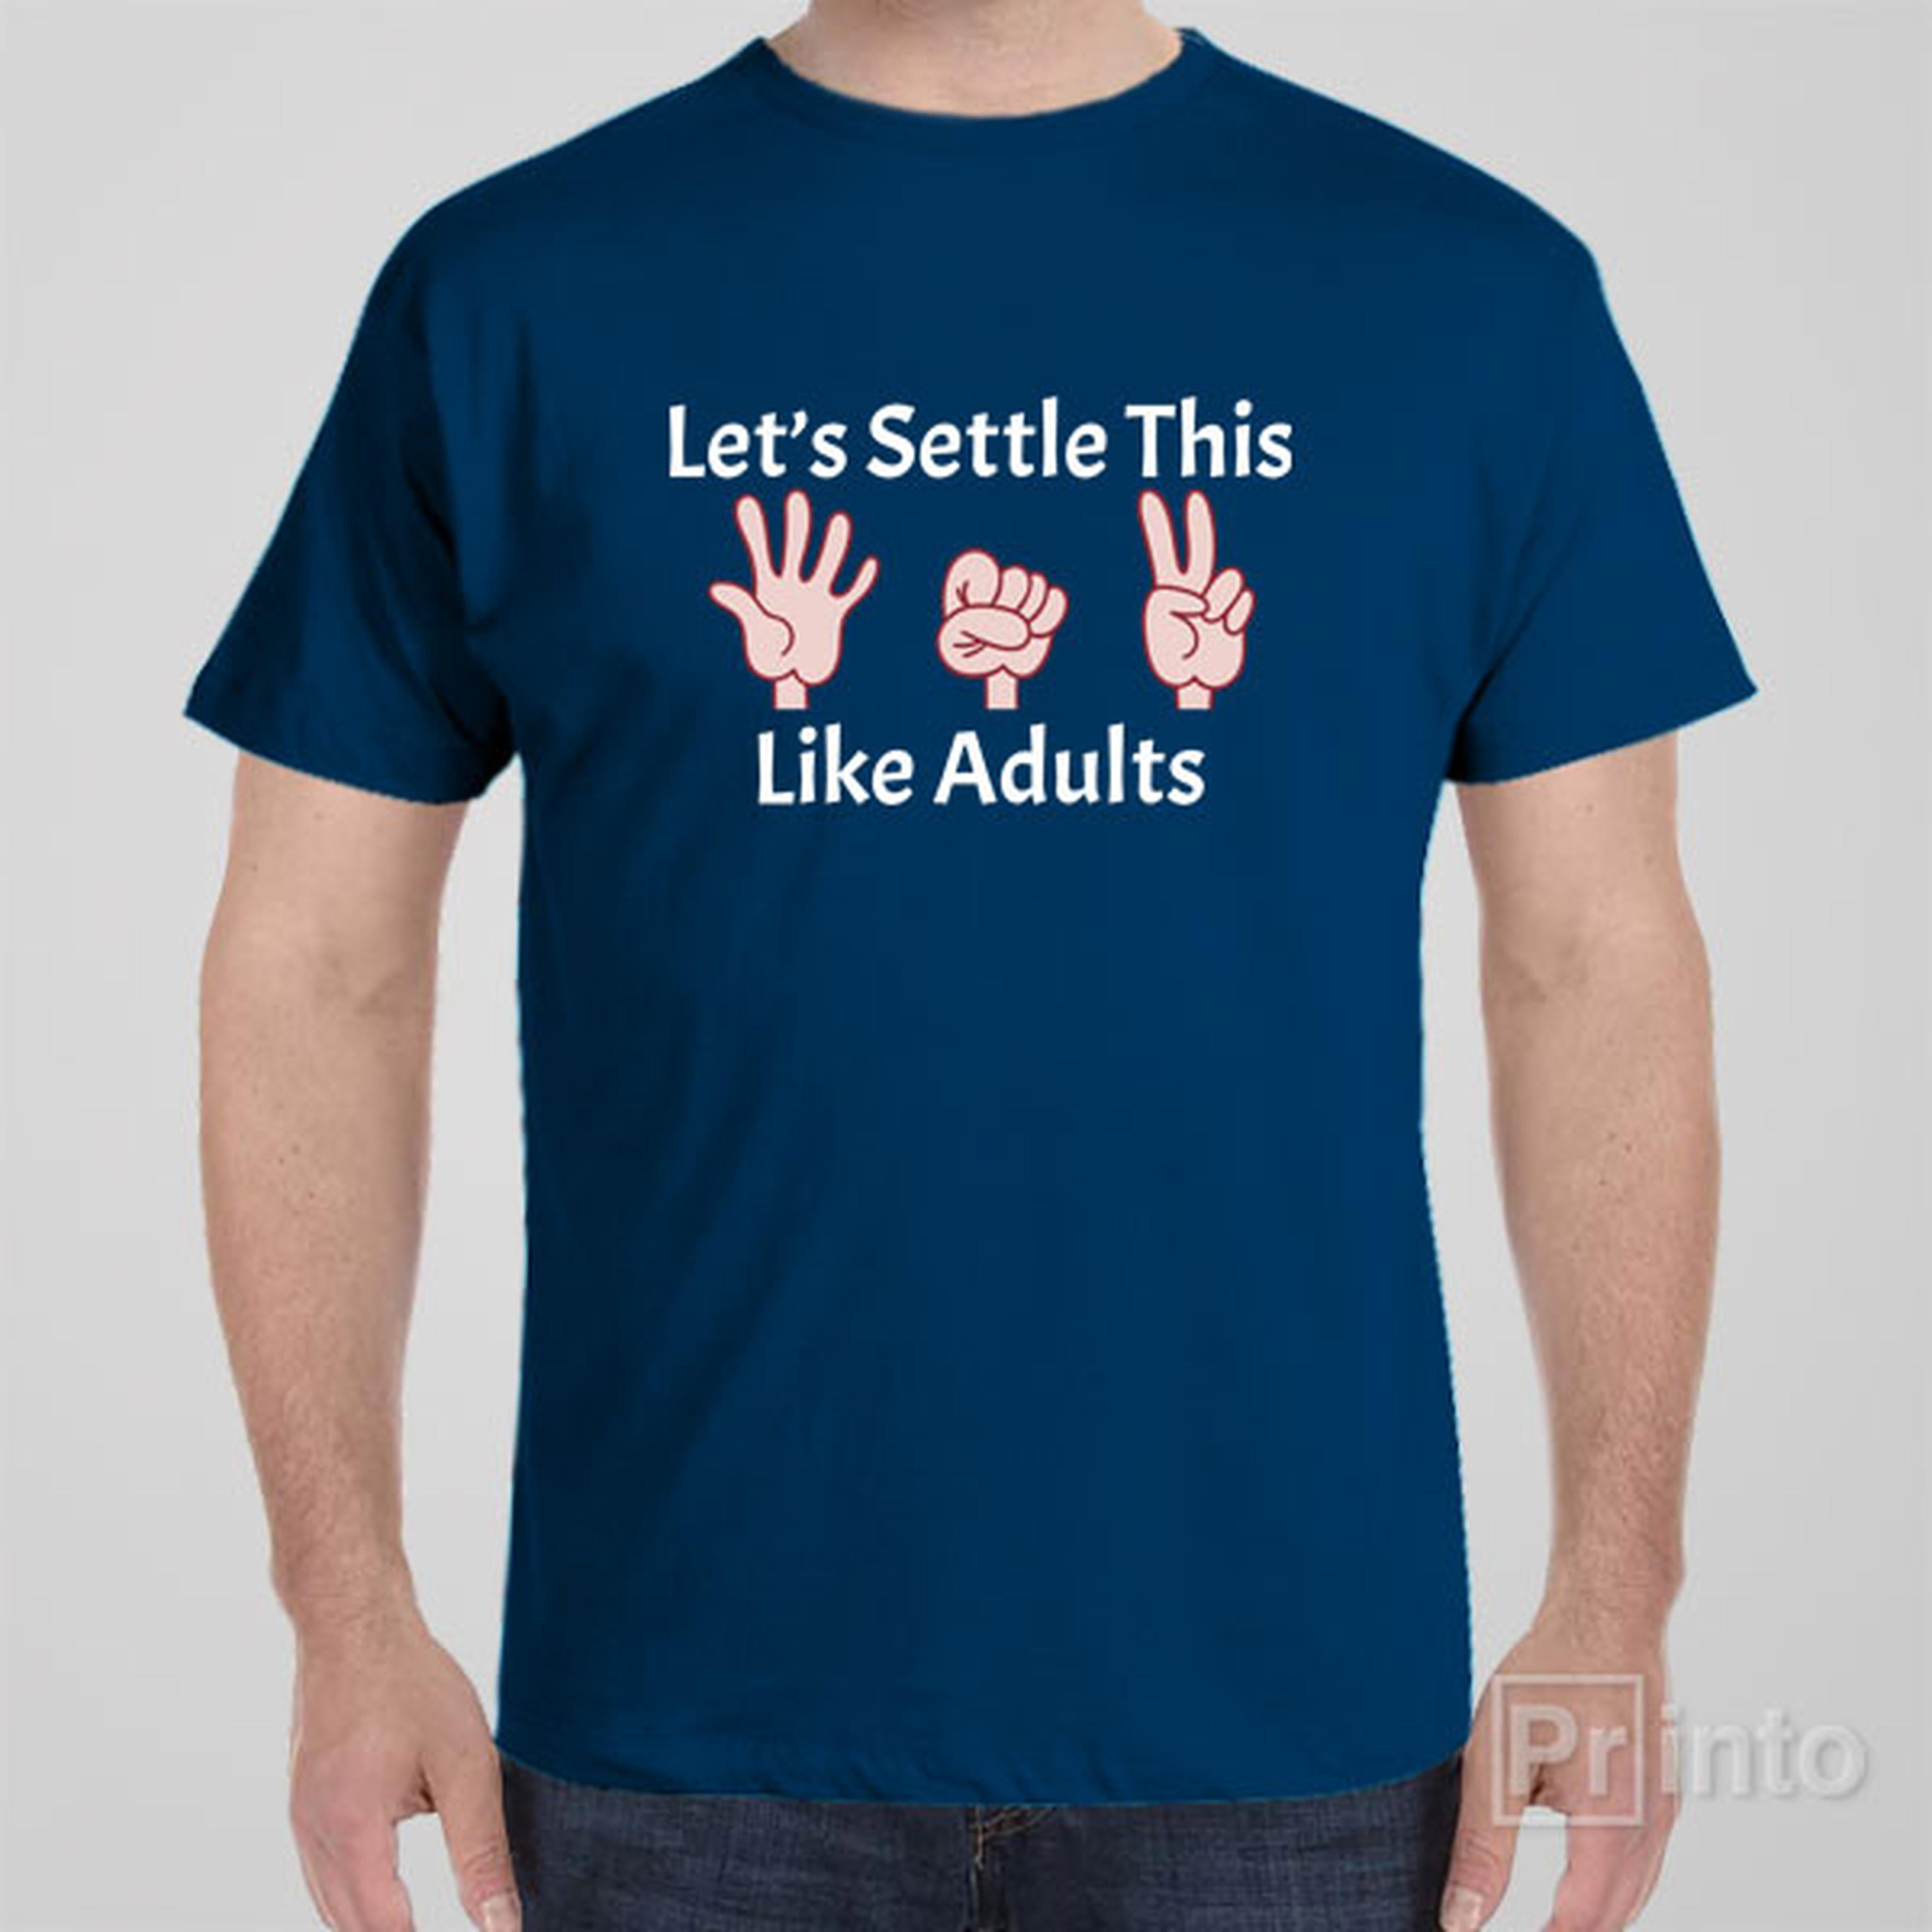 lets-settle-this-like-adults-t-shirt